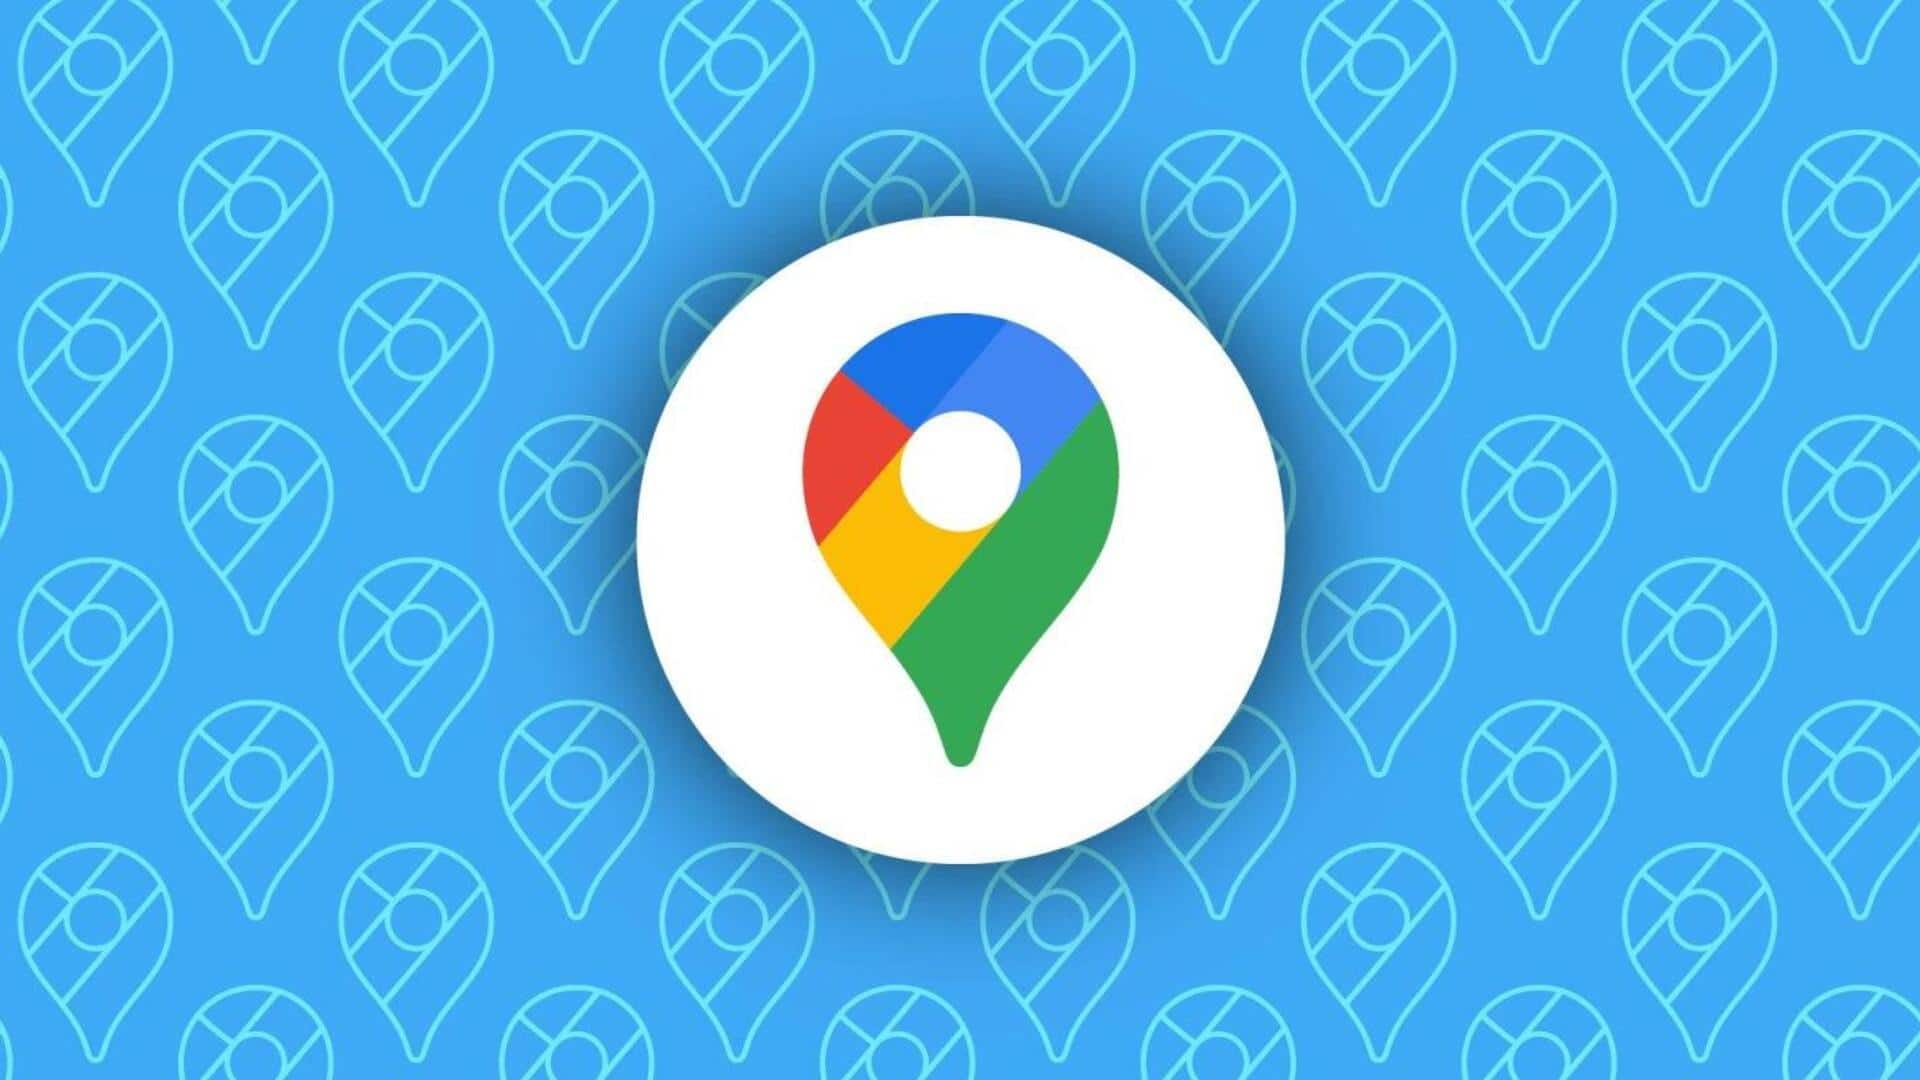 Gemini now automatically starts Google Maps when asked for directions